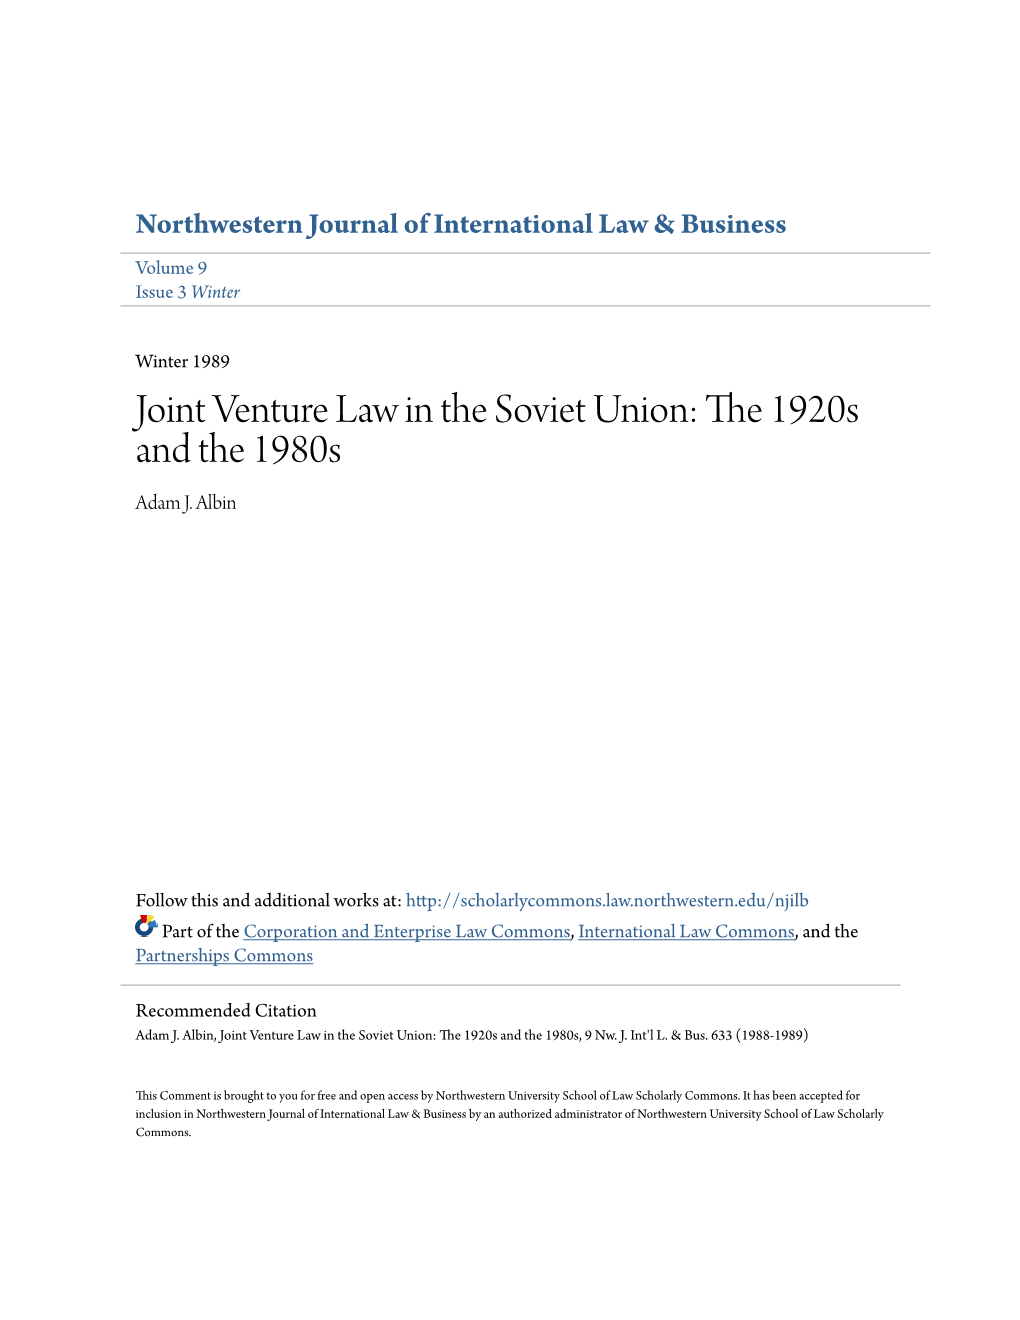 Joint Venture Law in the Soviet Union: the 1920S and the 1980S Adam J